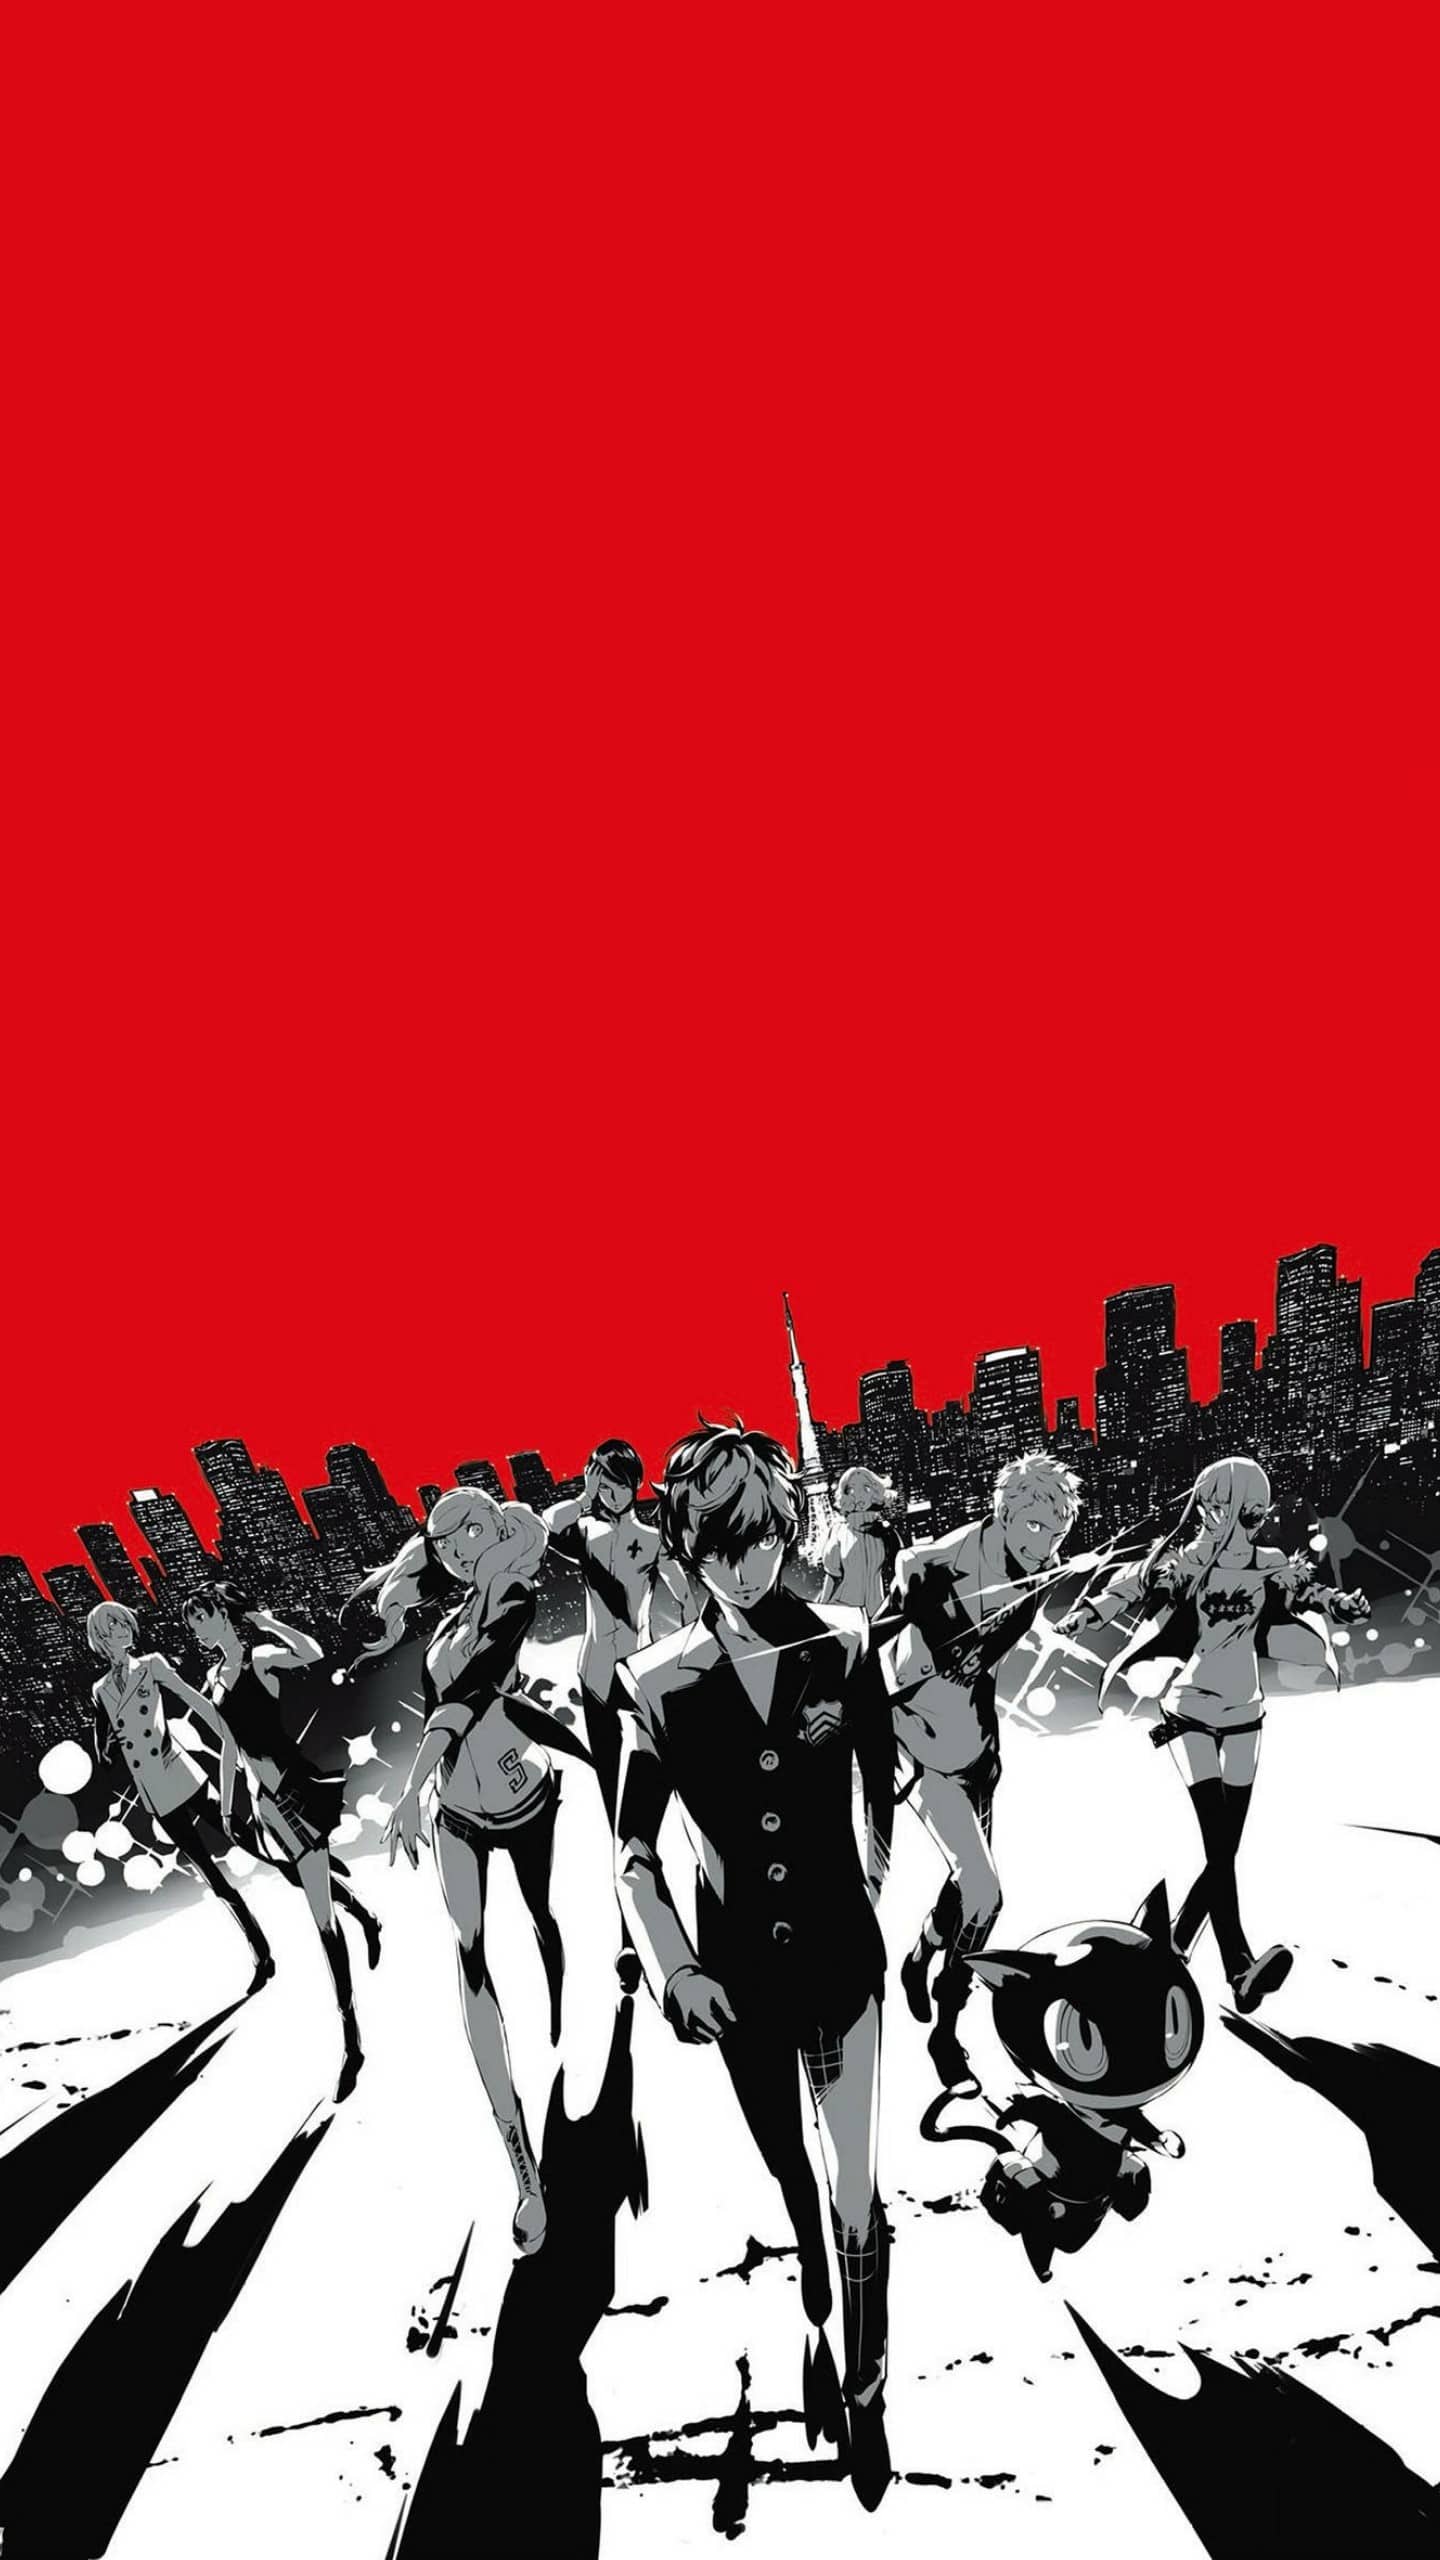 Persona 5 Iphone Wallpapers Wallpaper Cave